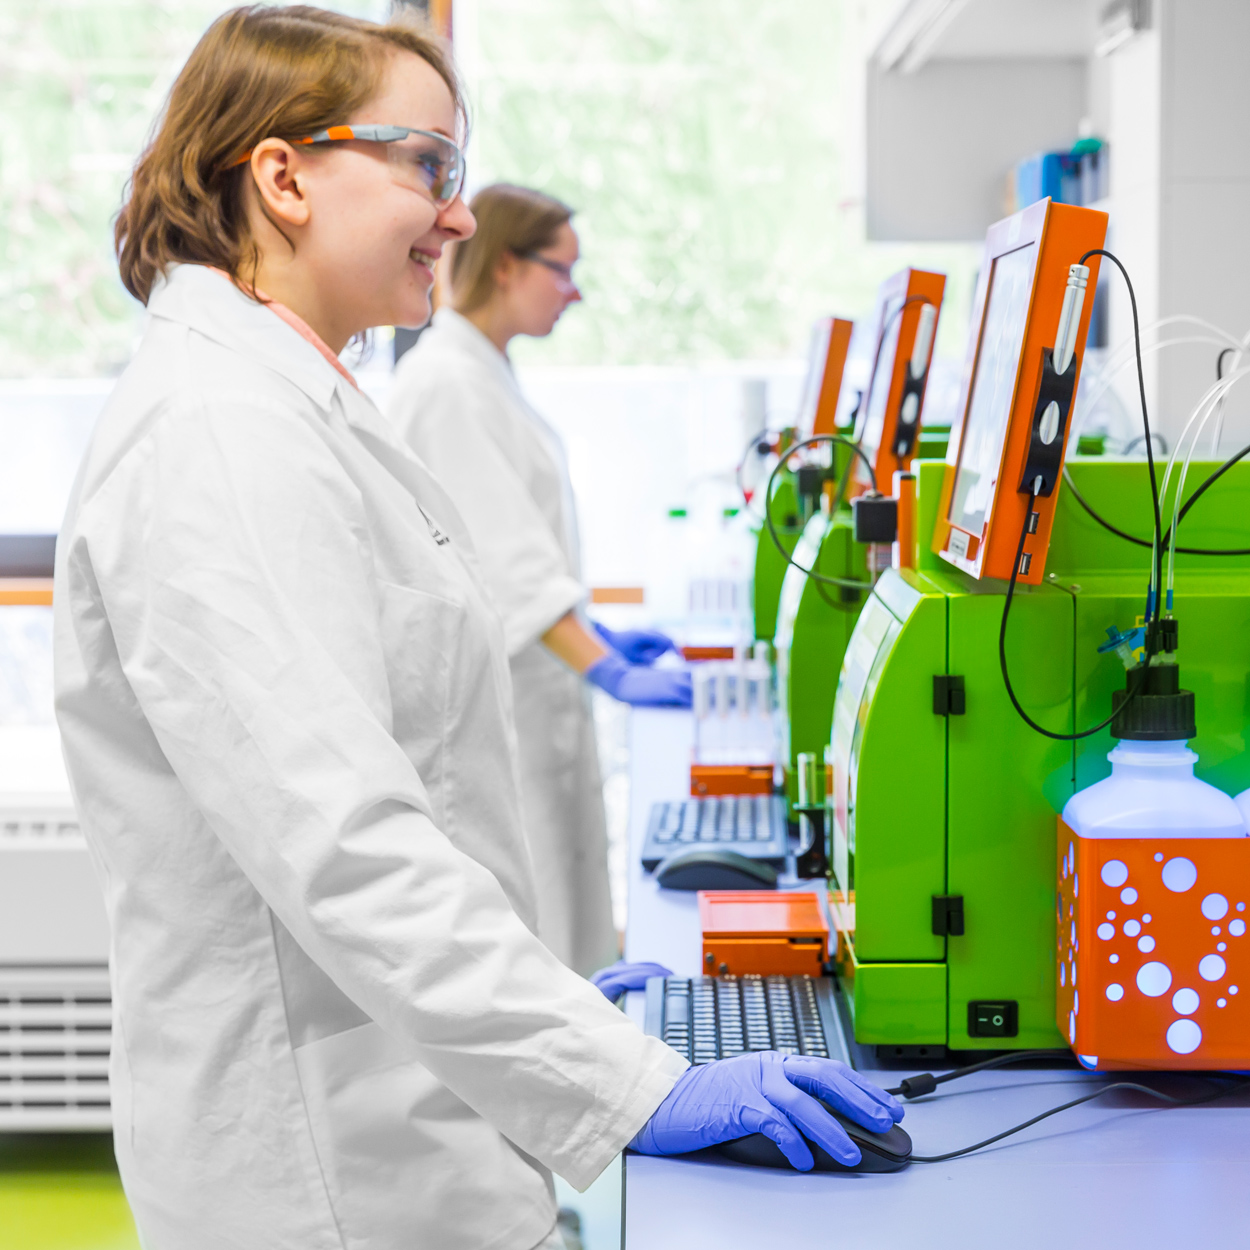 Two females wearing lab attire working on a row of MACSQuant Analyzers.